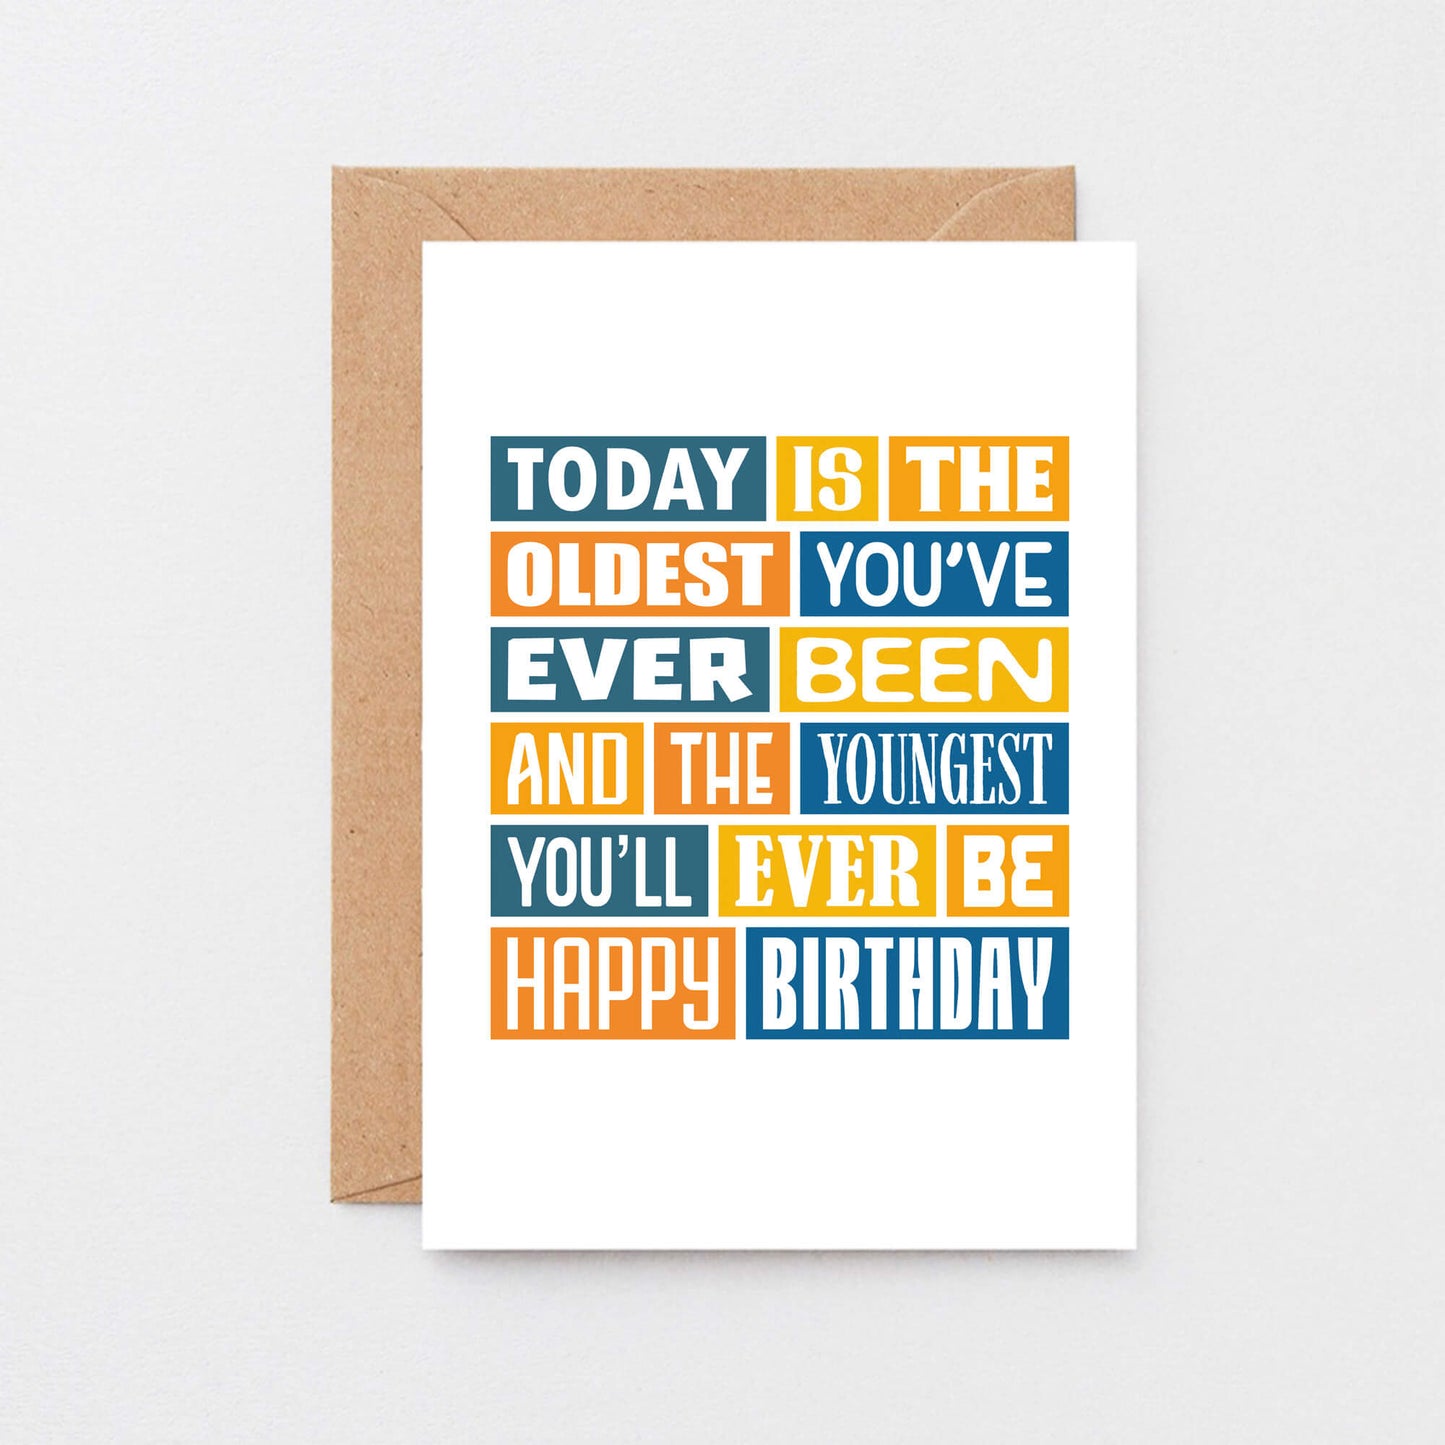 Funny Birthday Card by SixElevenCreations. Reads Today is the oldest you've ever been and the youngest you'll ever be. Happy birthday. Product Code SE0016A6